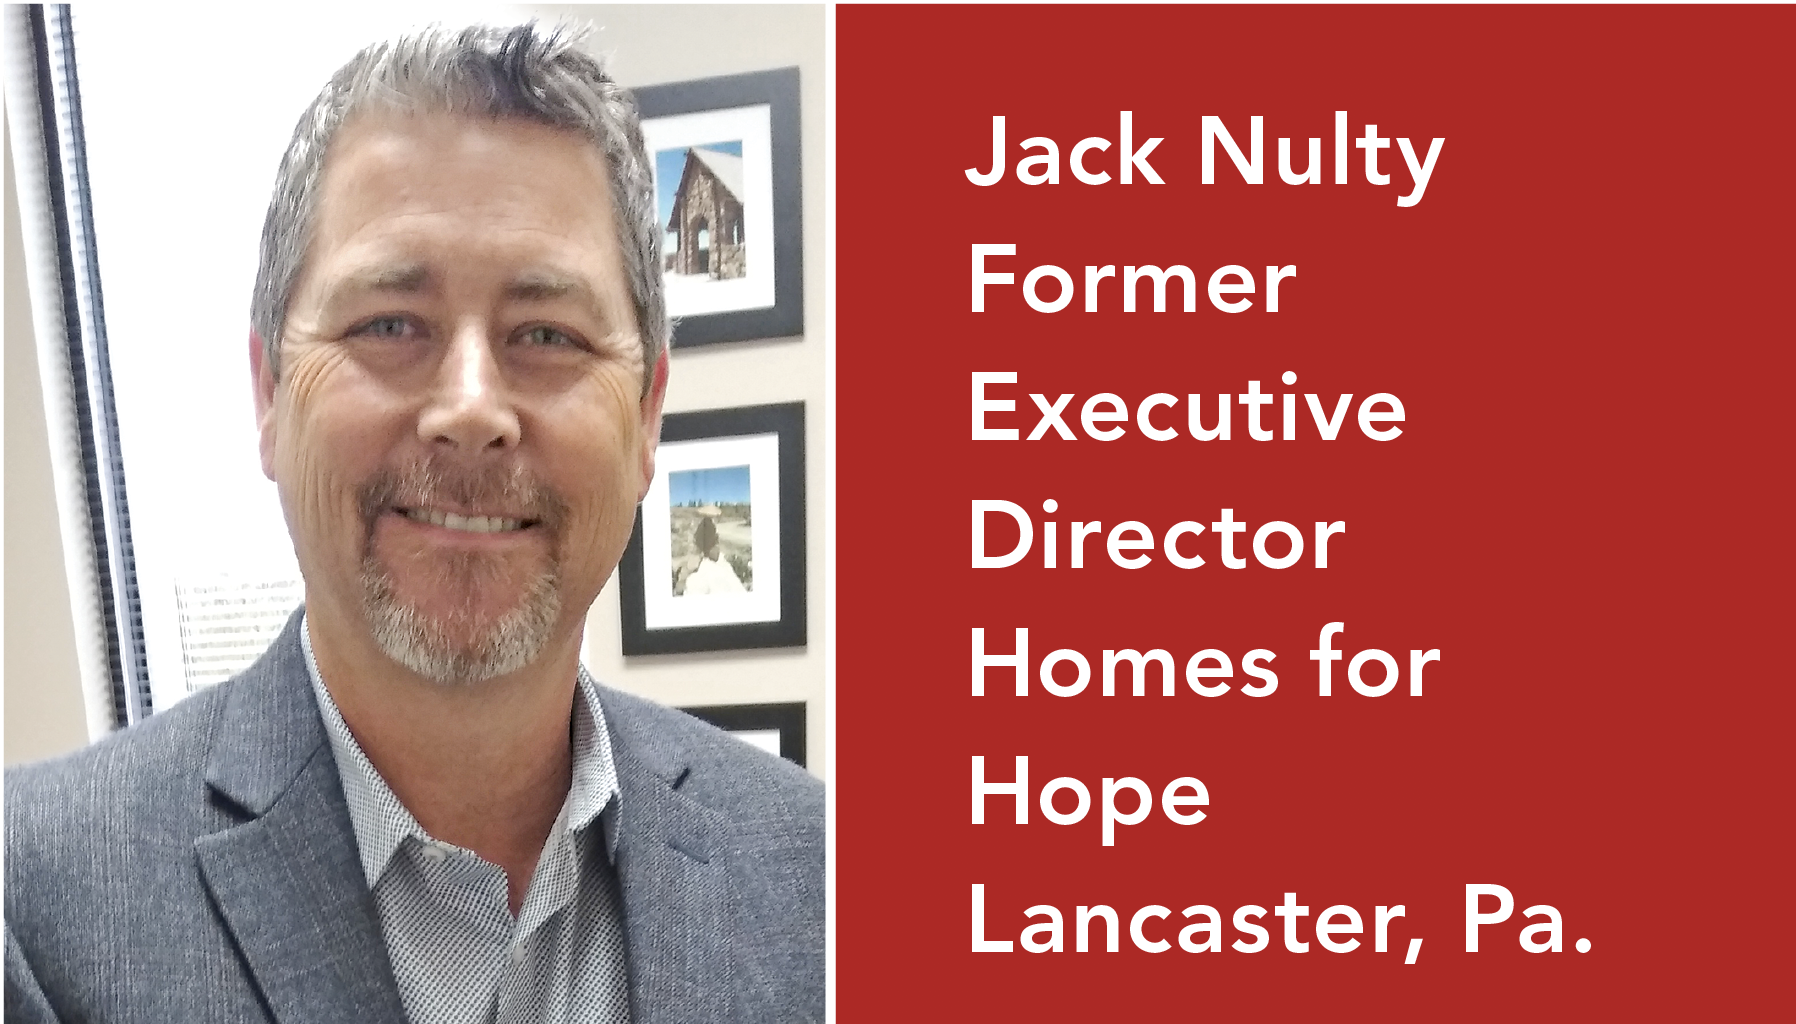 Jack Nulty, former executive director of nonprofit Homes for Hope